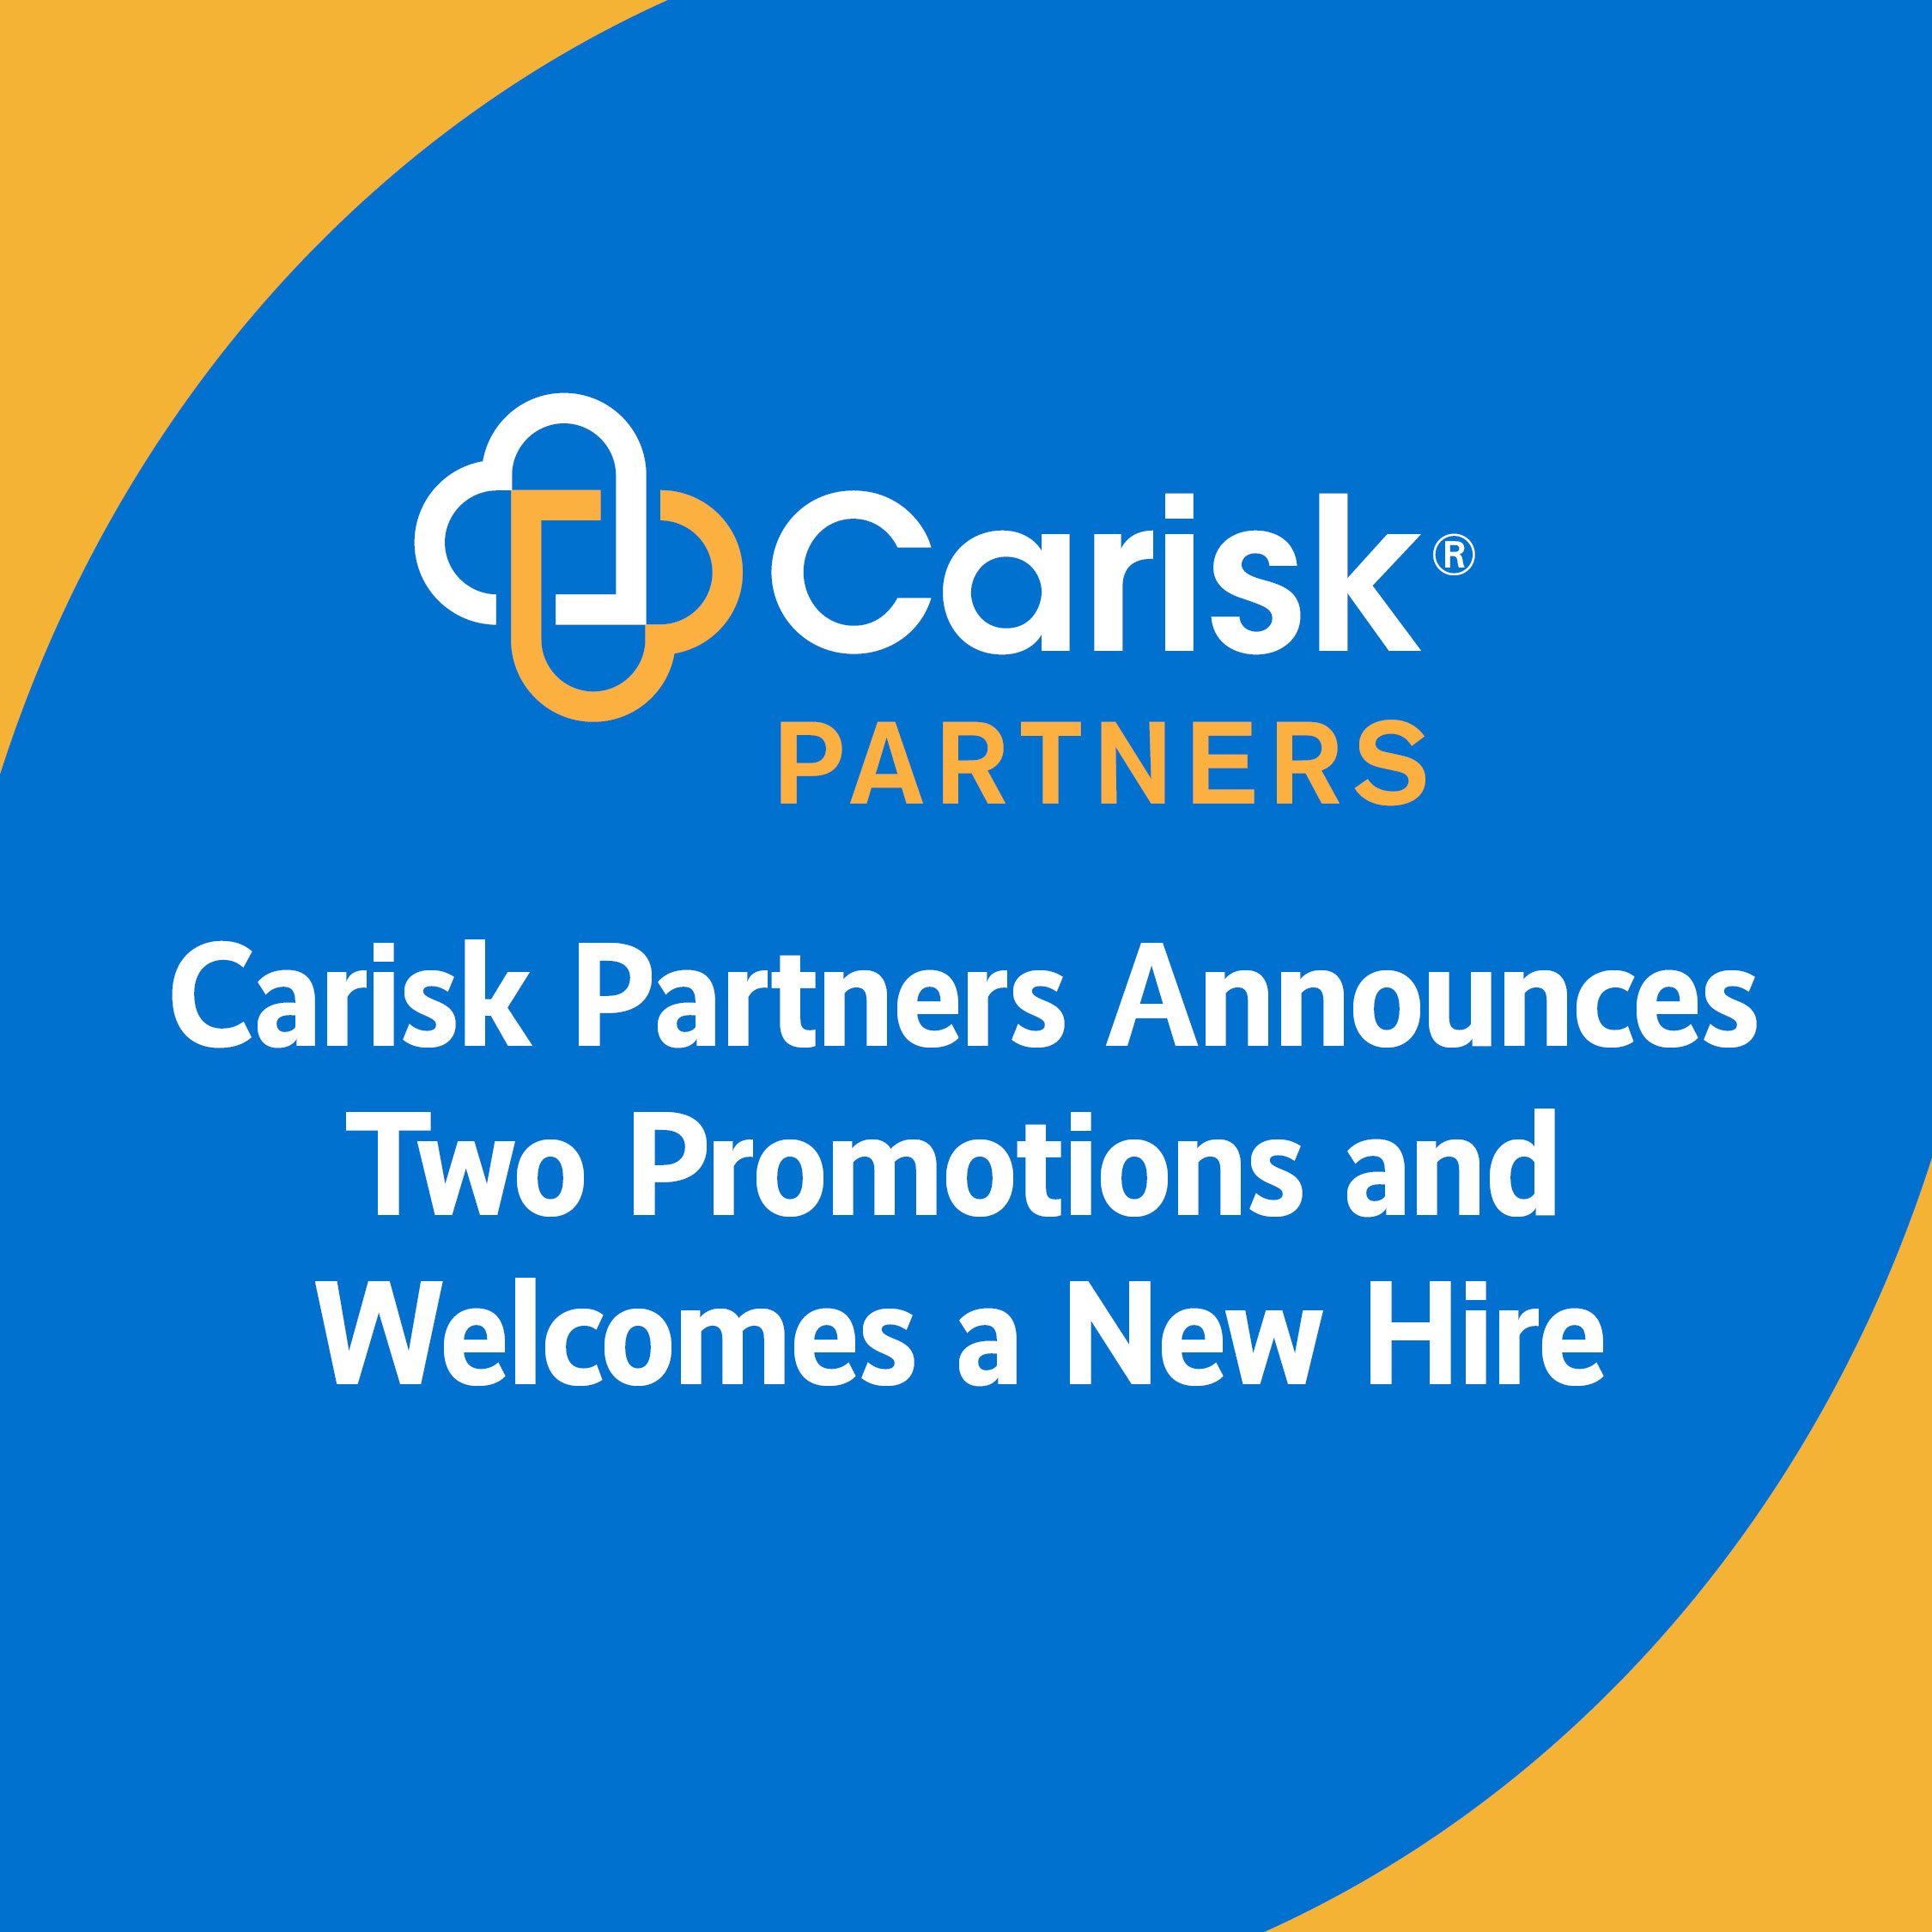 Carisk Partners Announces Two Promotions and Welcomes a New Hire